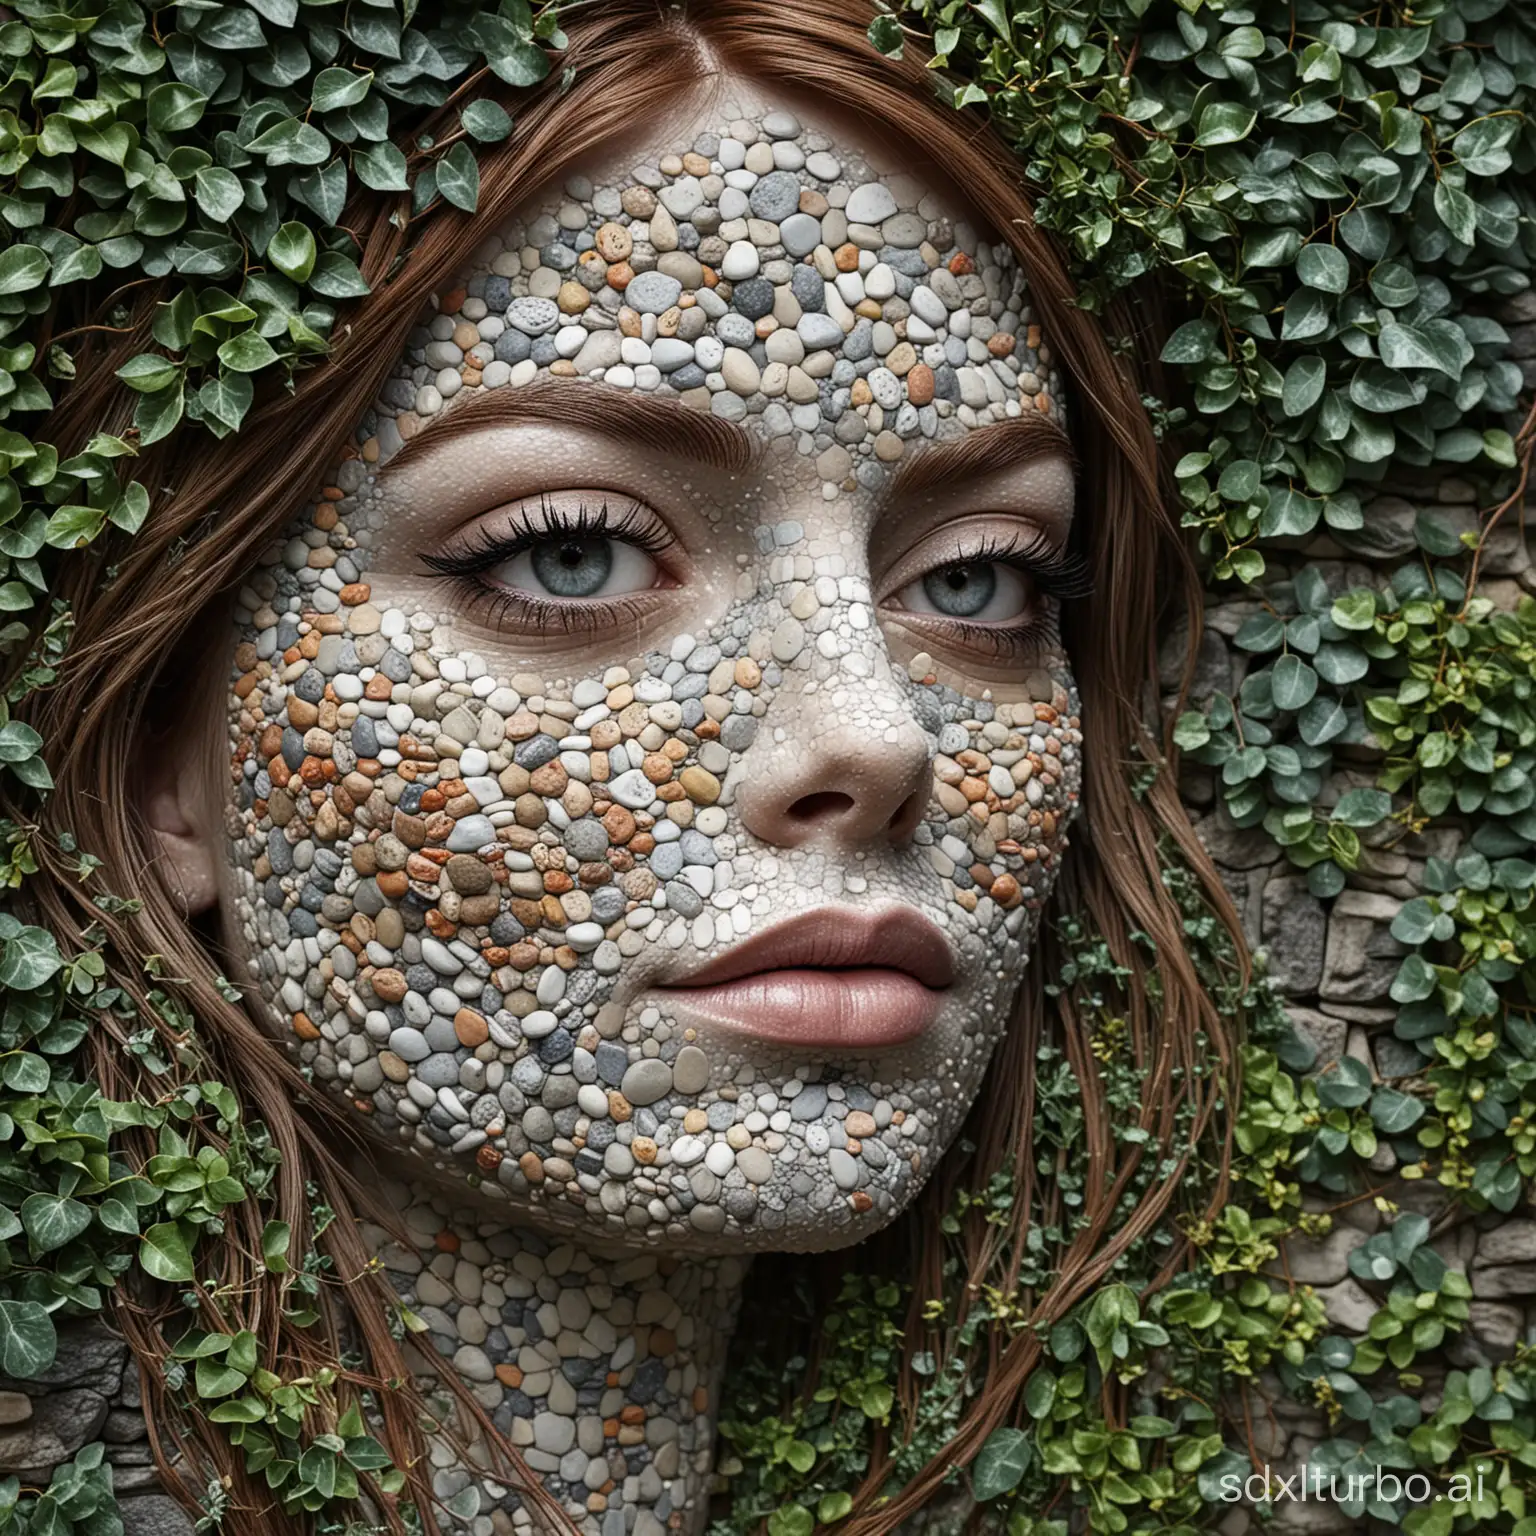 Intricate-Mosaic-Portrait-Emma-Stone-Lookalike-Crafted-from-Pebbles